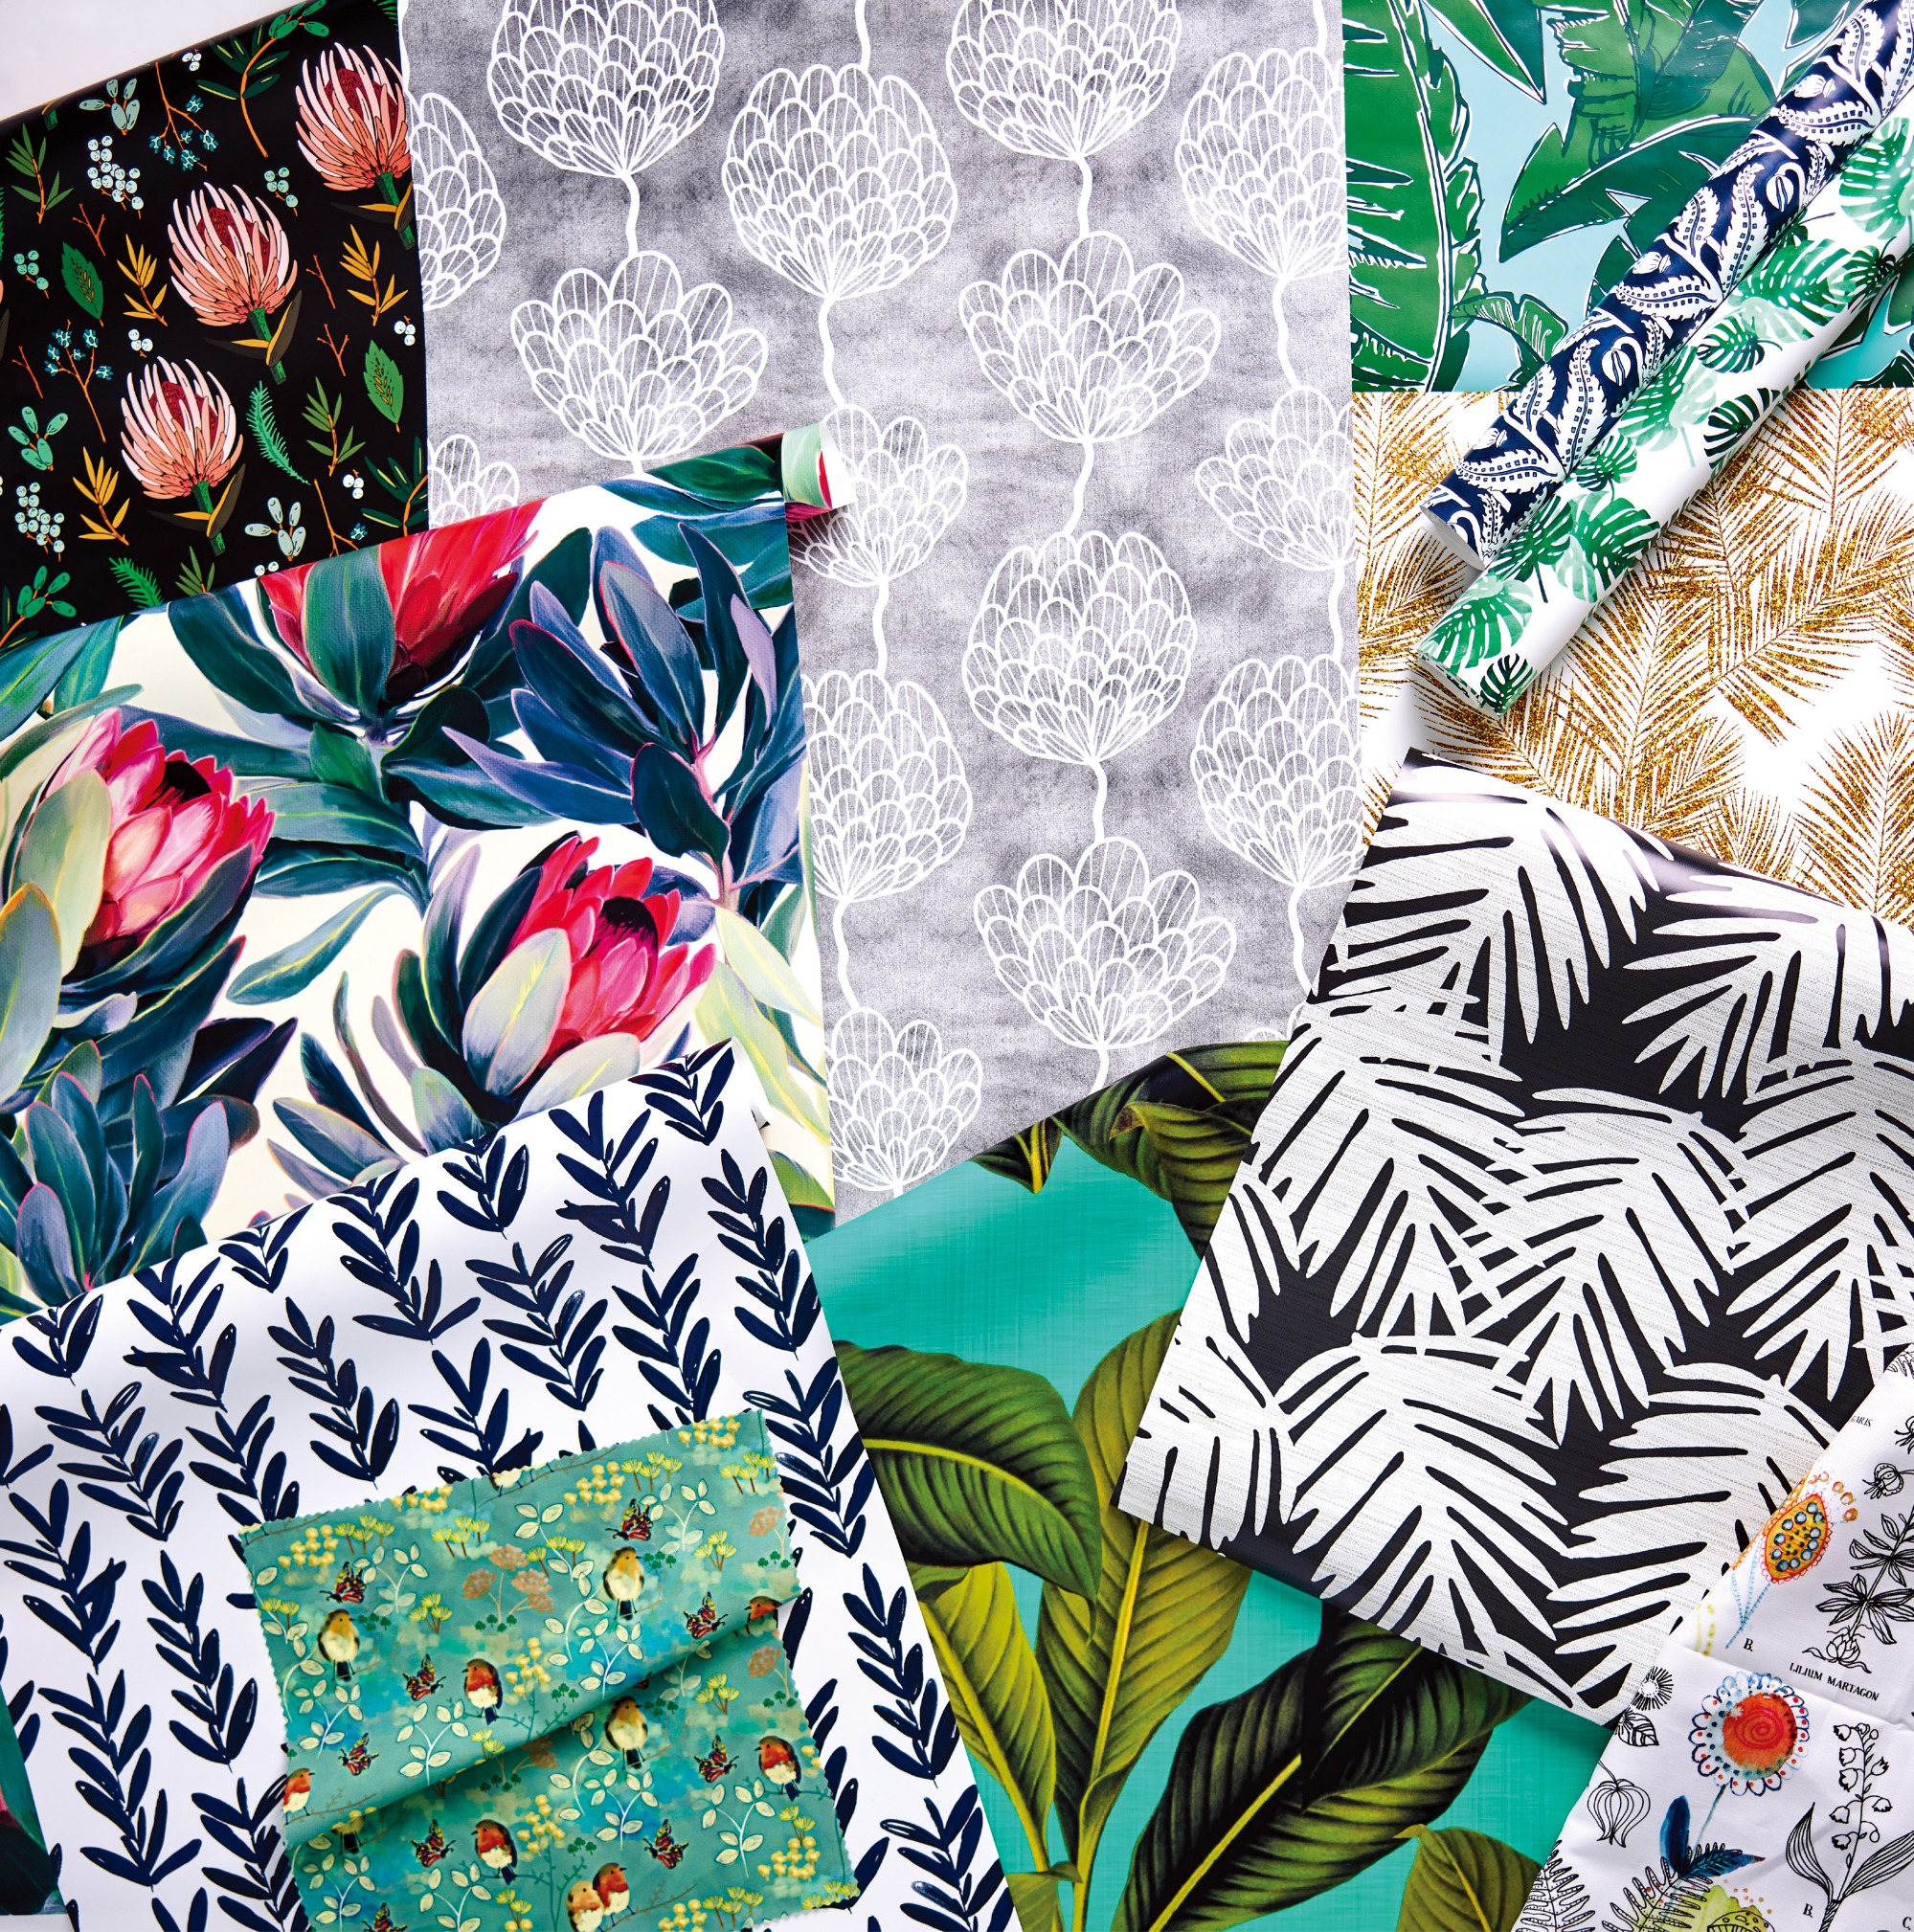 Digital Textile Printing Market to be Worth $6.65 Billion by 2030